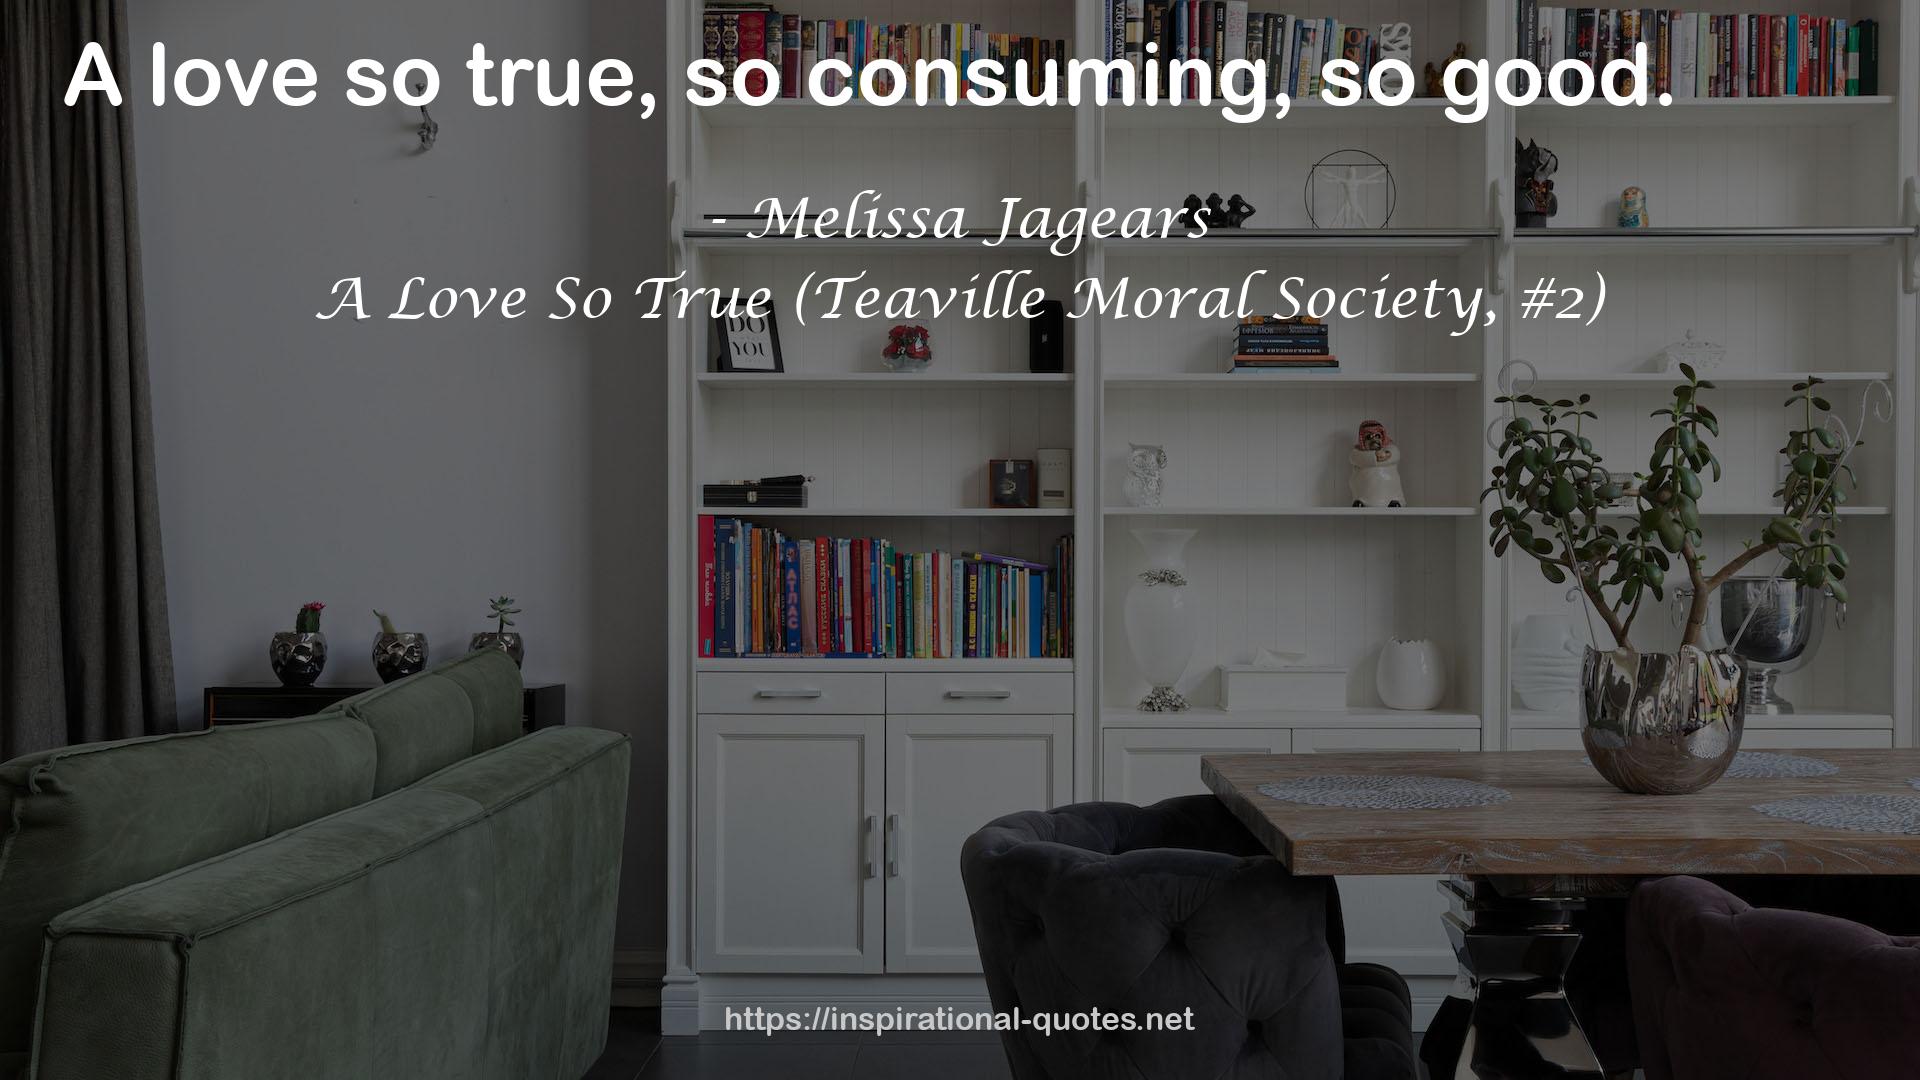 A Love So True (Teaville Moral Society, #2) QUOTES